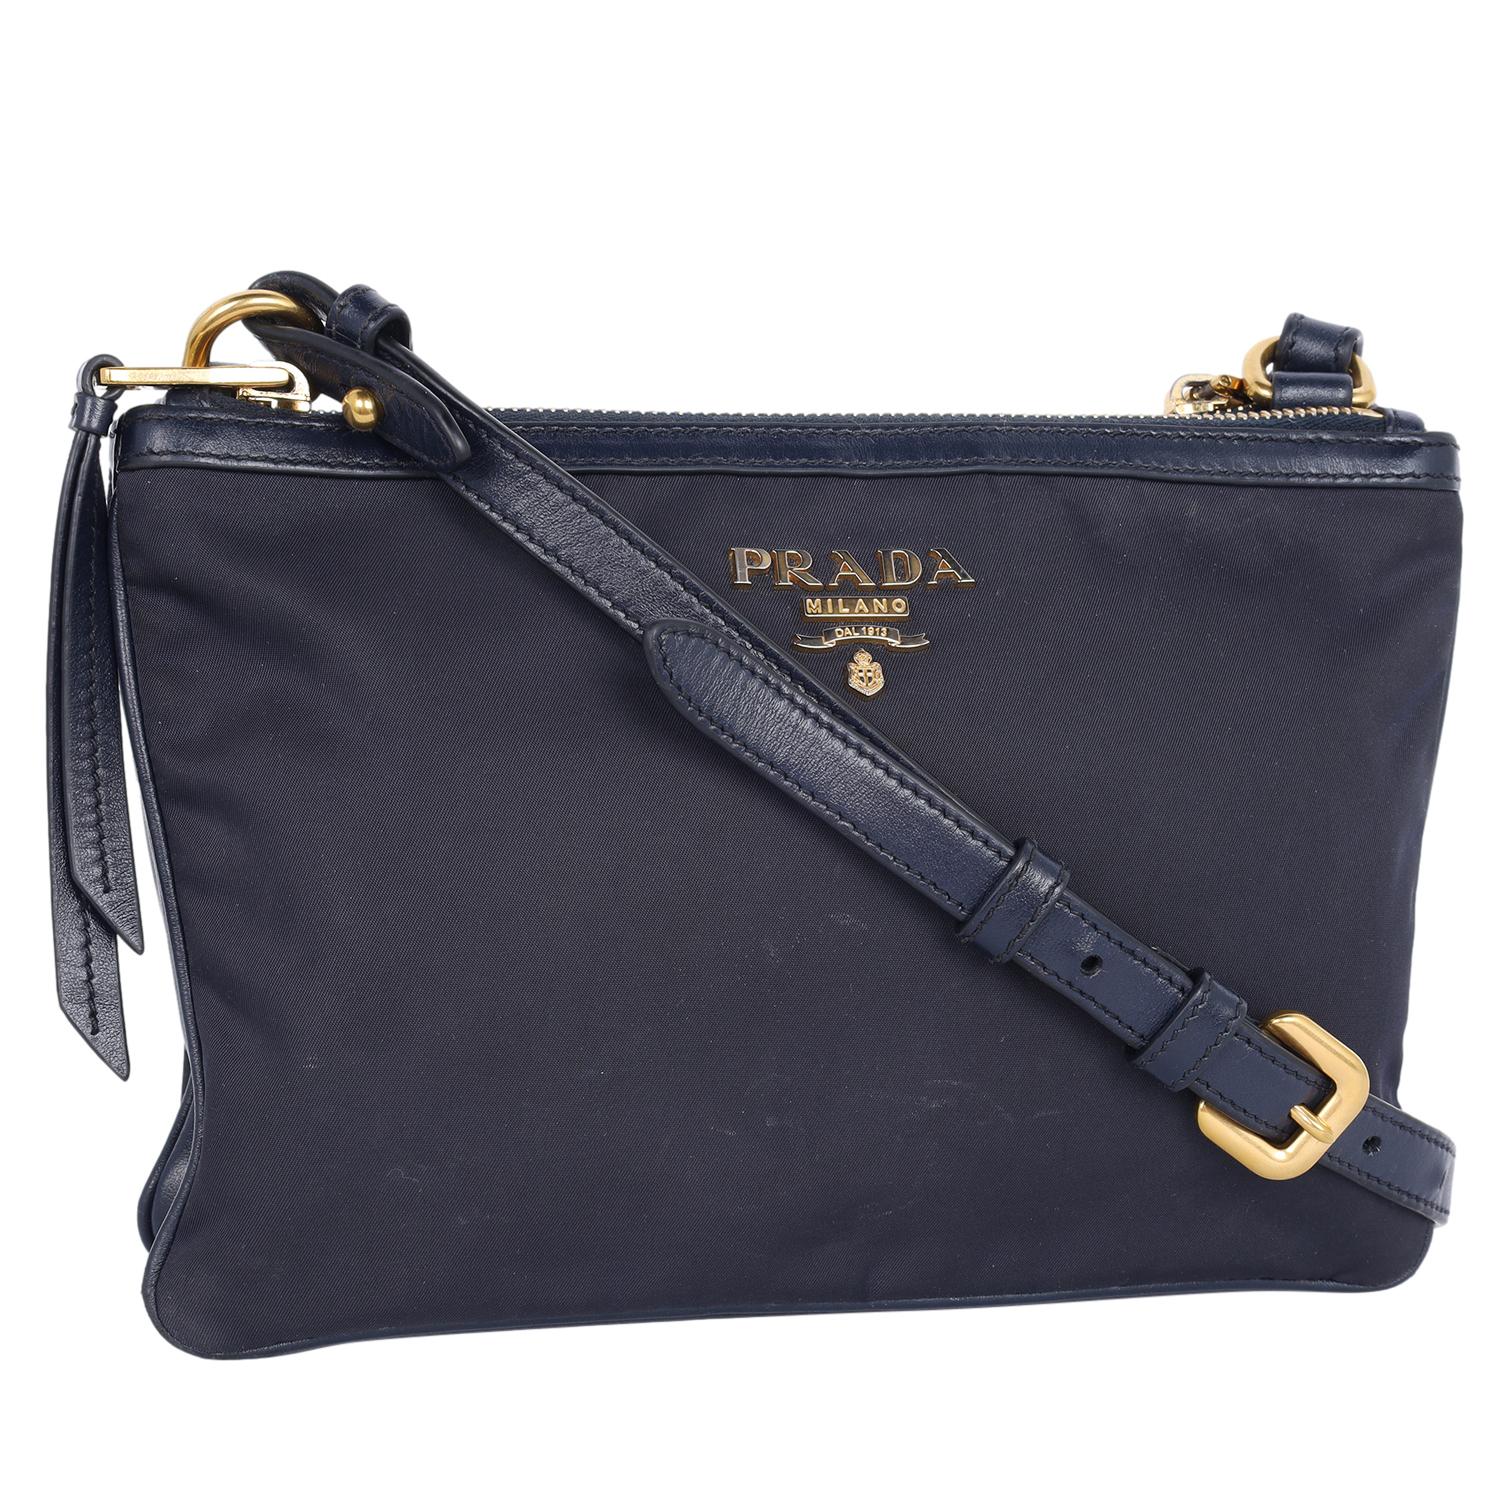 Authentic, pre-loved Prada tessuto nylon blue double zip leather crossbody bag. Features double sided bags with zipper top closure, leather accent, gold tone hardware, long adjustable leather strap, interior with zipper pocket. The dark blue color